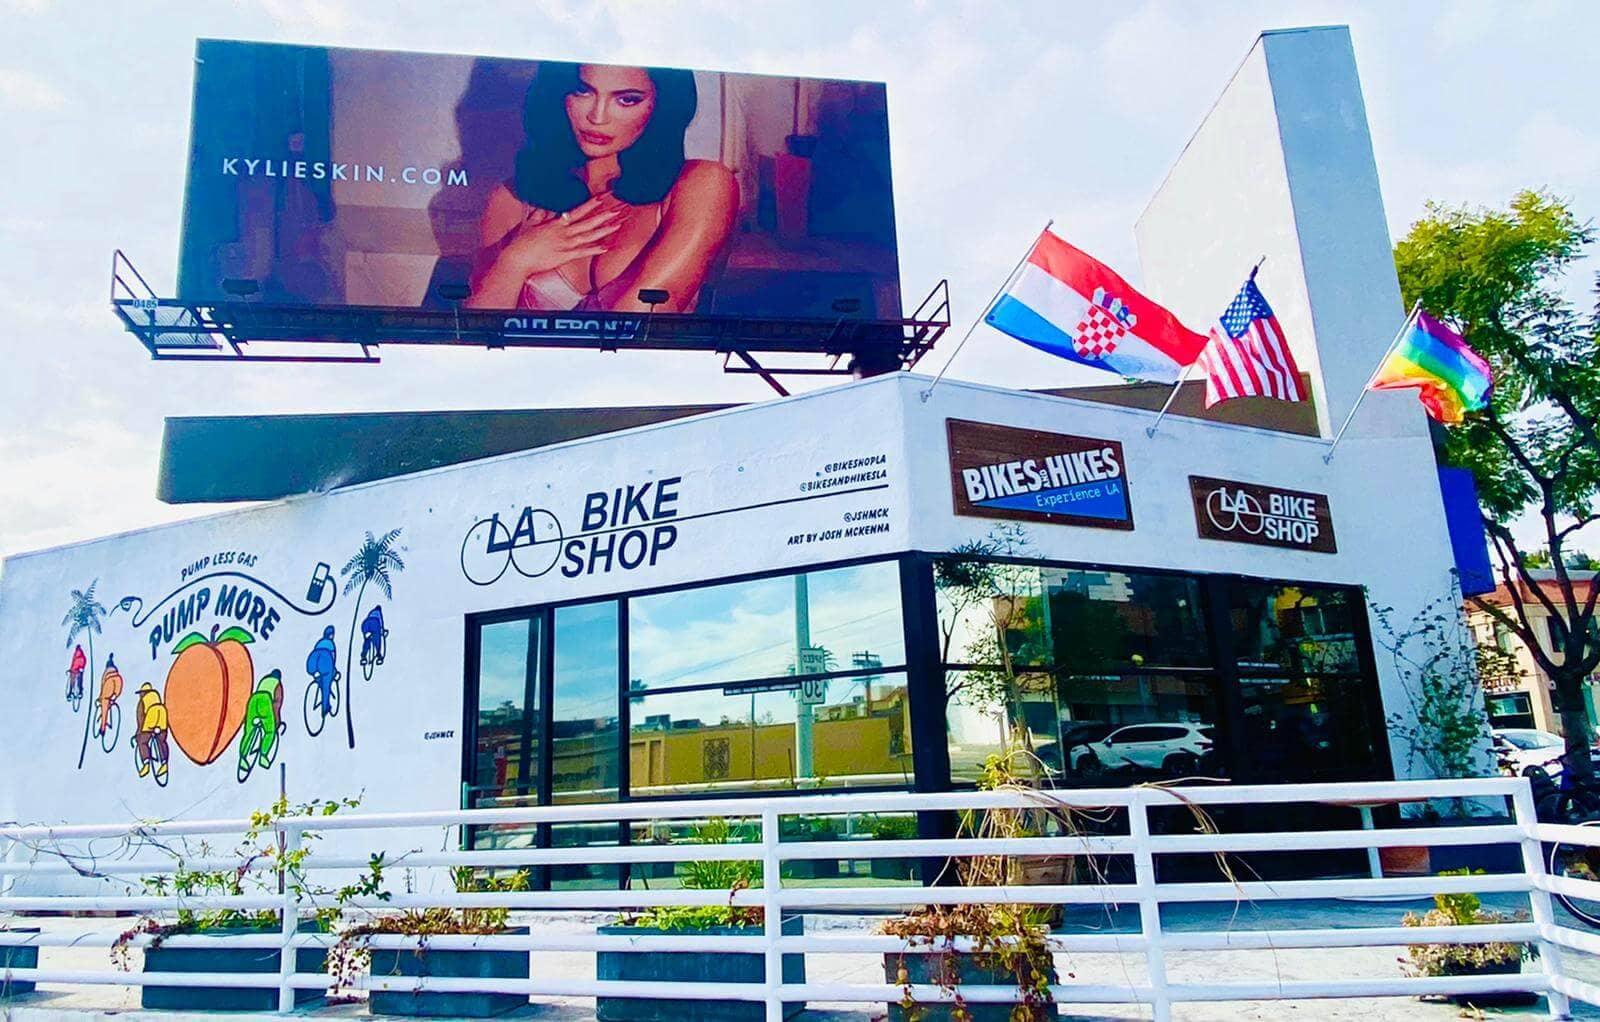 a bike shop in los angeles beneath a large billboard featuring an image of kylie jenner